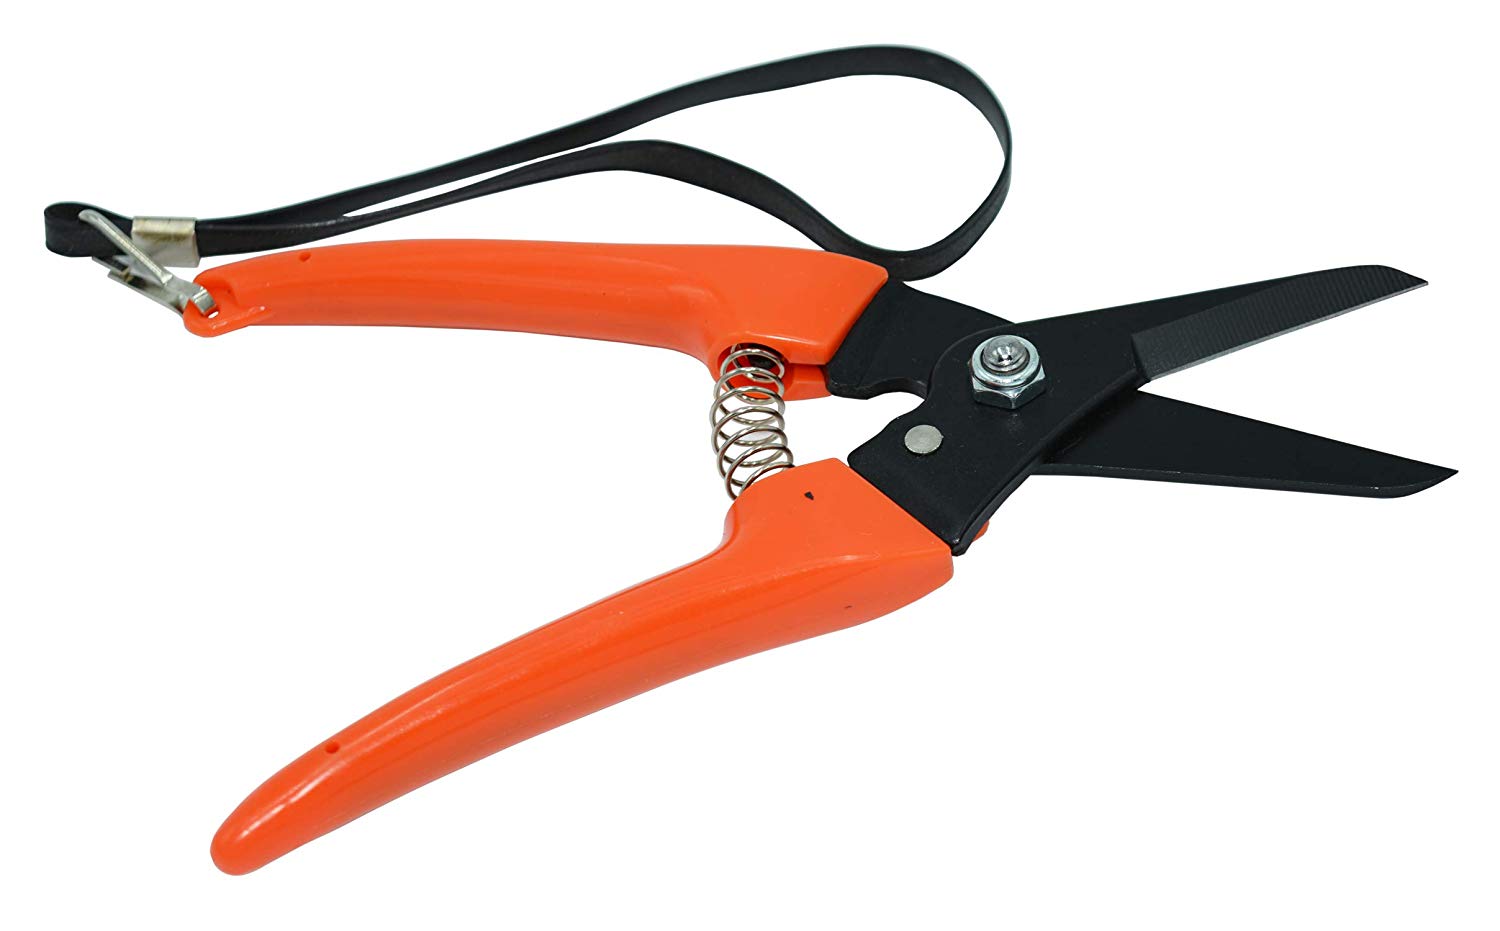 Zenport Pruner Spring SPQ91-S Zen Magic, Ultra Twig and Hoof Trimming Shears, 7.25-Inch - Click Image to Close